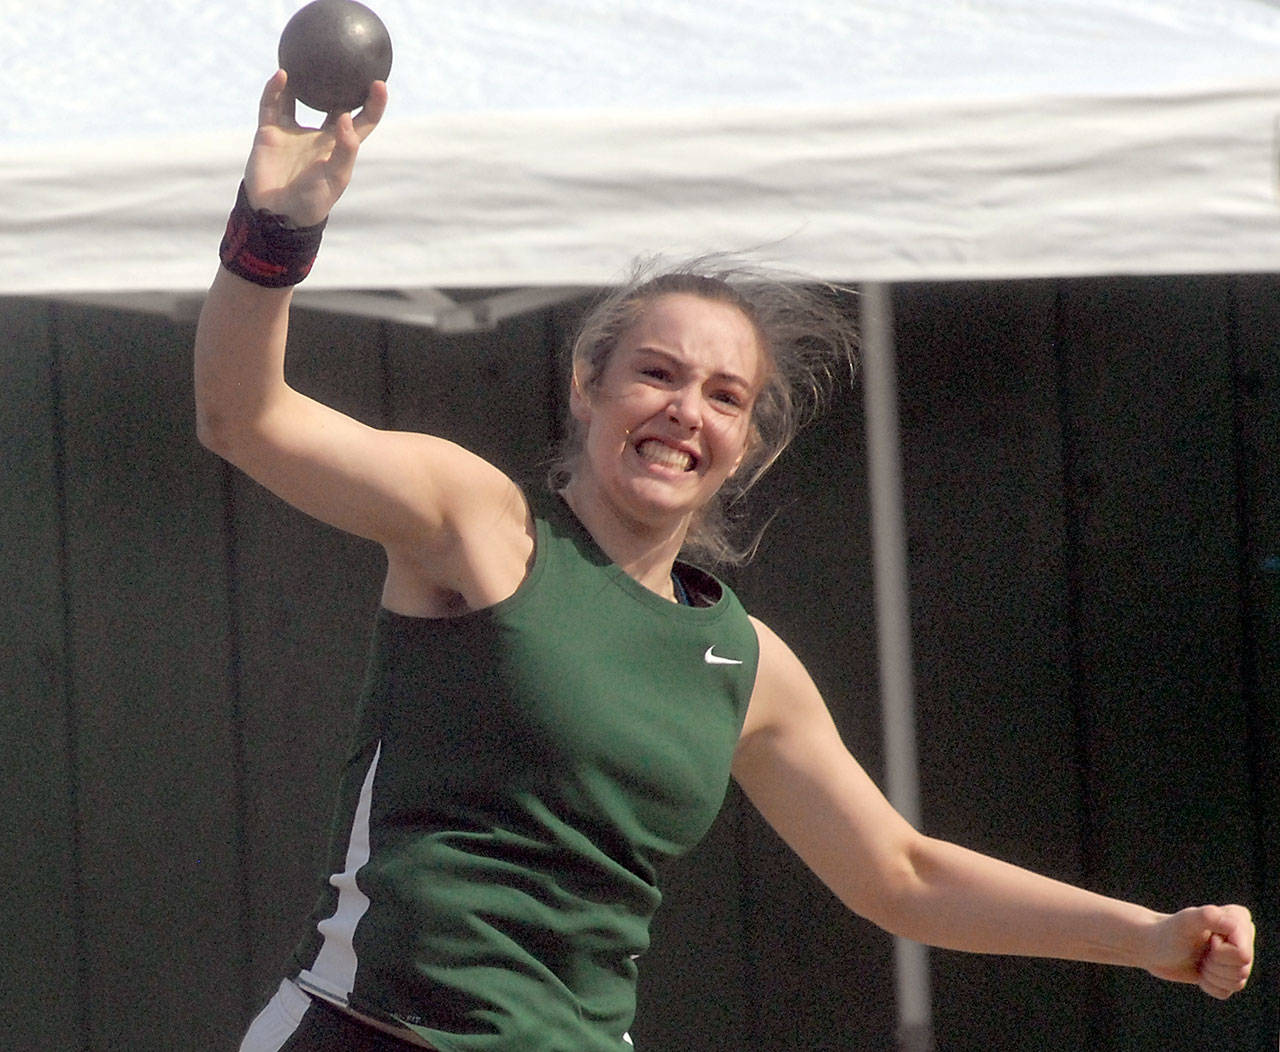 Devin Edwards of Port Angeles puts in the girls shot put on her home field during the Port Angeles Invitational meet on Saturday. (Keith Thorpe/Peninsula Daily News)